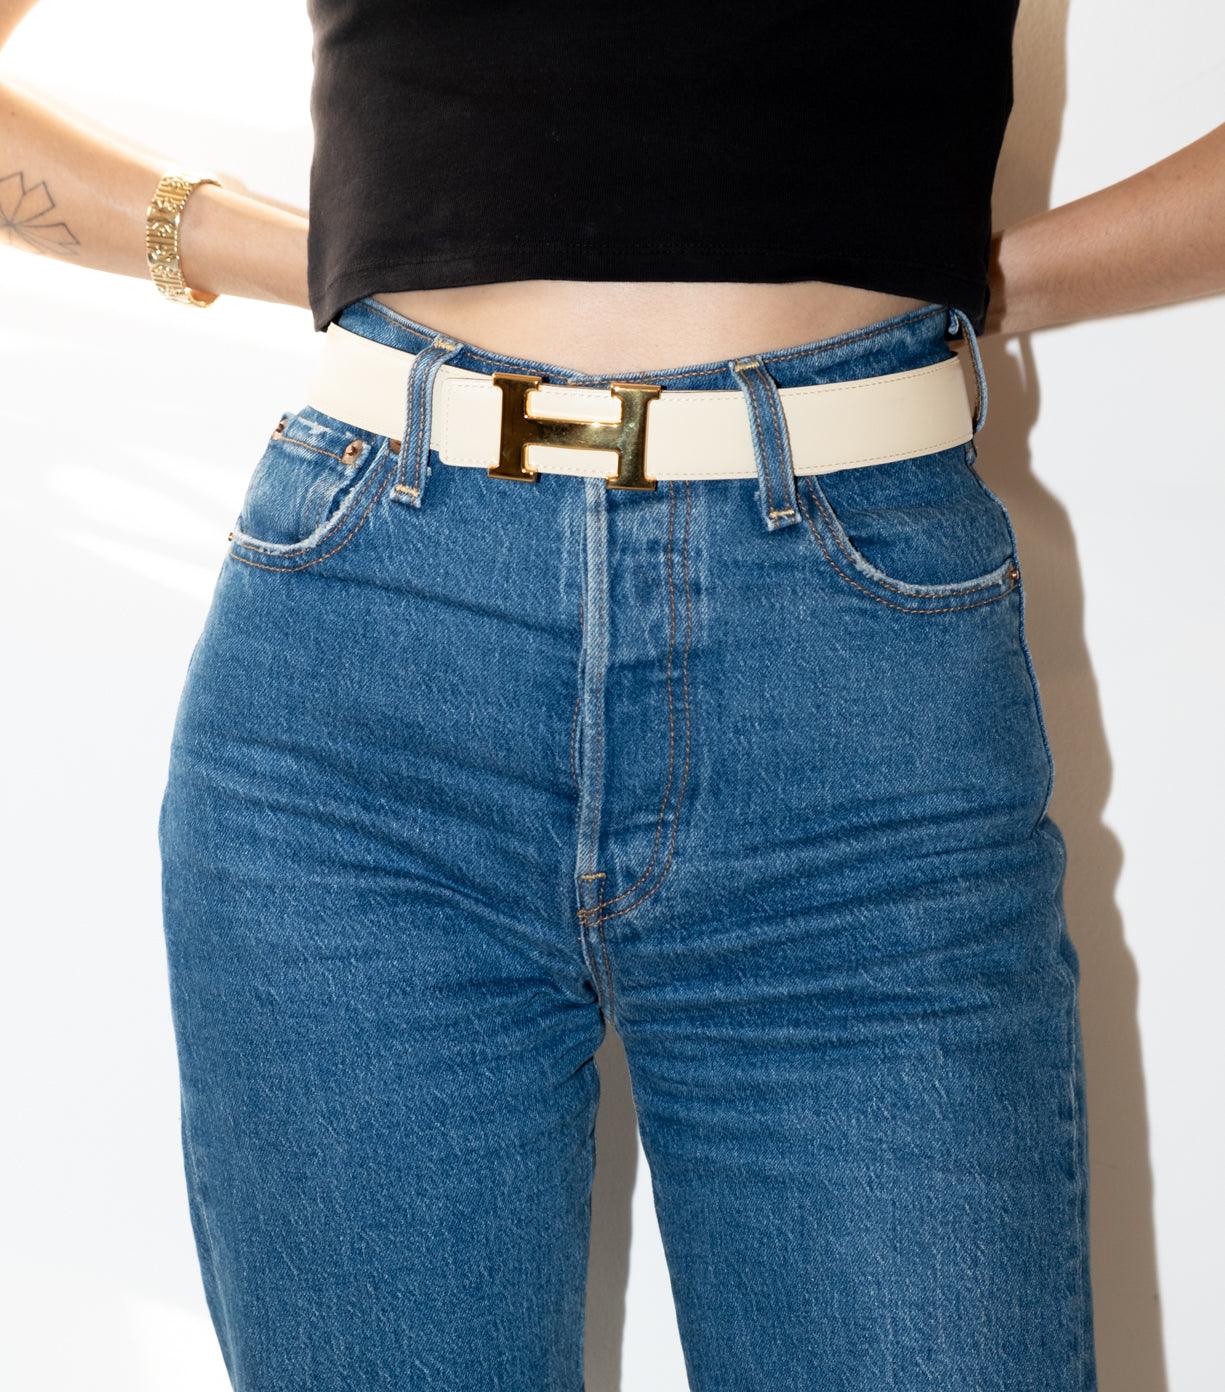 double Sided Leather Belt Gold